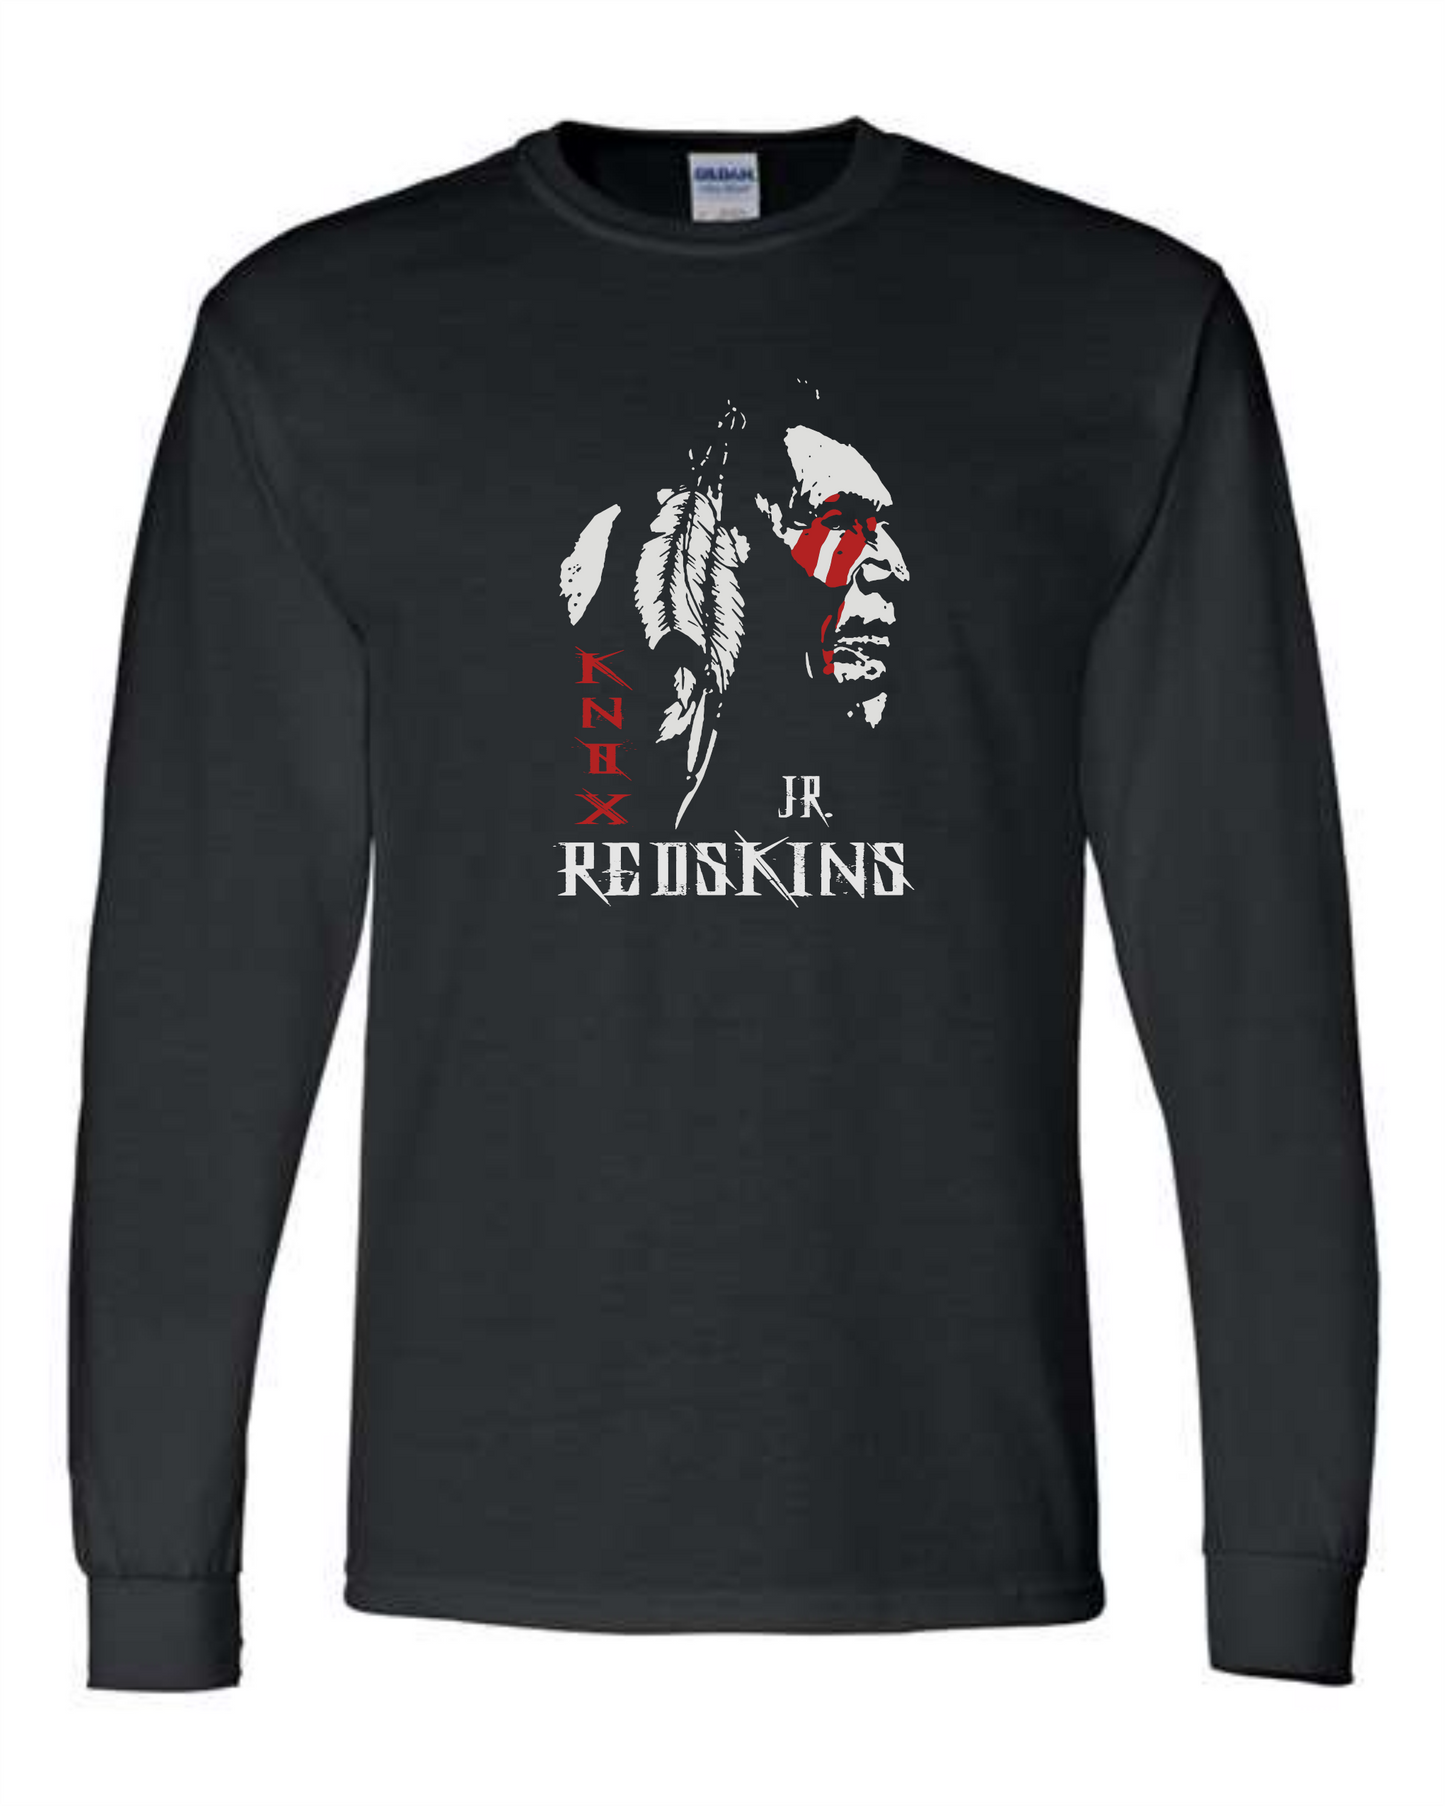 Knox Jr. Redskins Long Sleeve T - Black - Adult and Youth Sizes - Indian